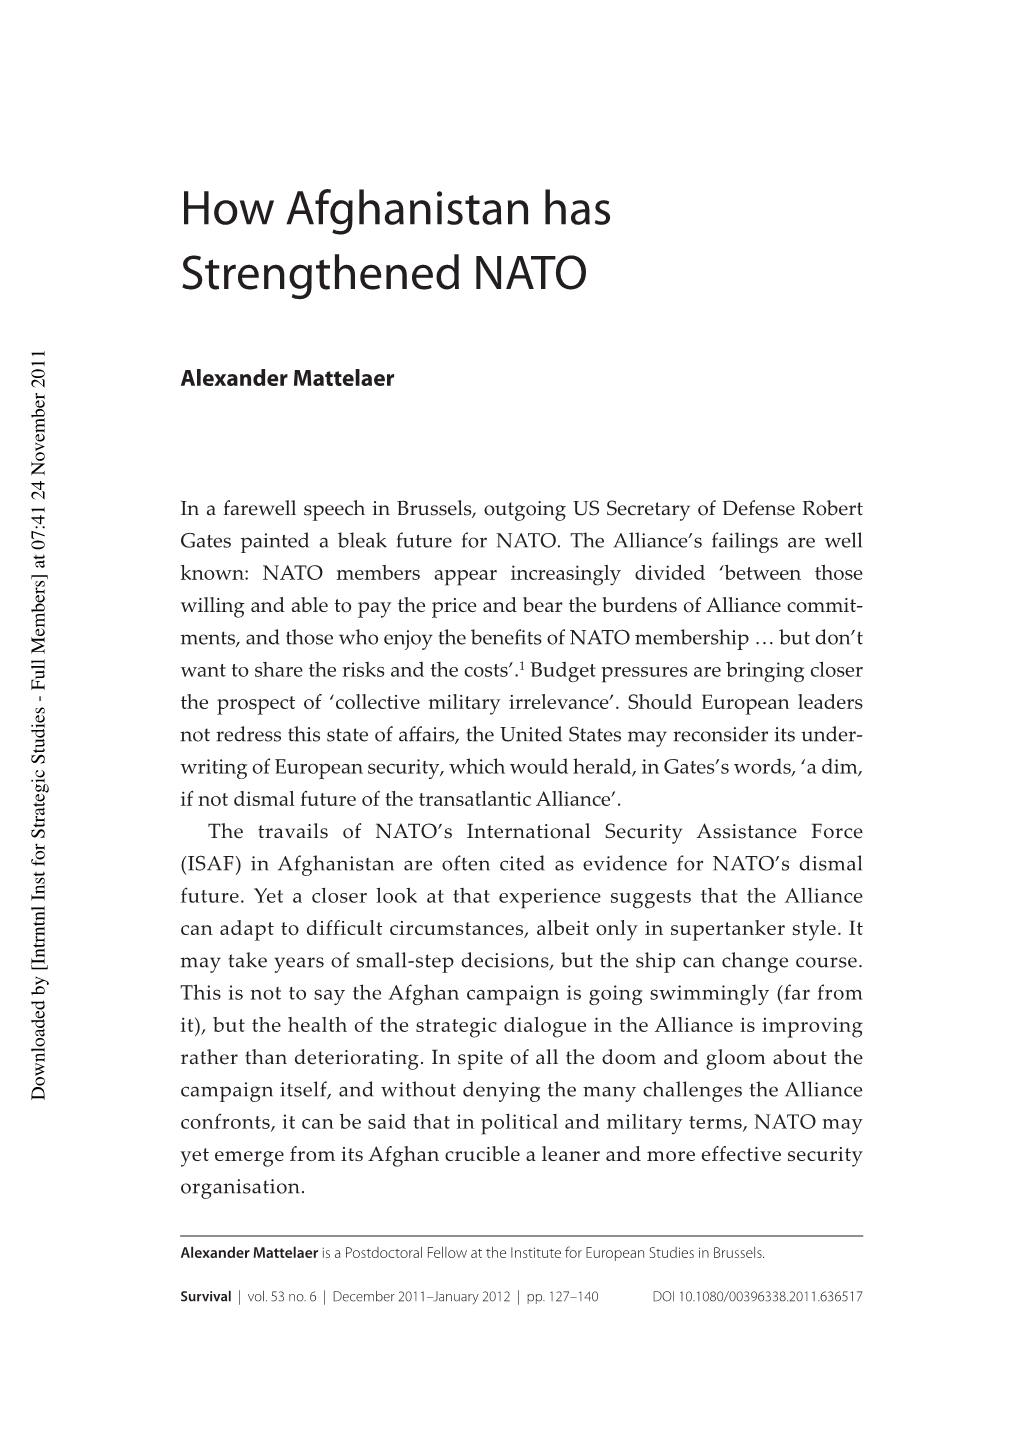 How Afghanistan Has Strengthened NATO